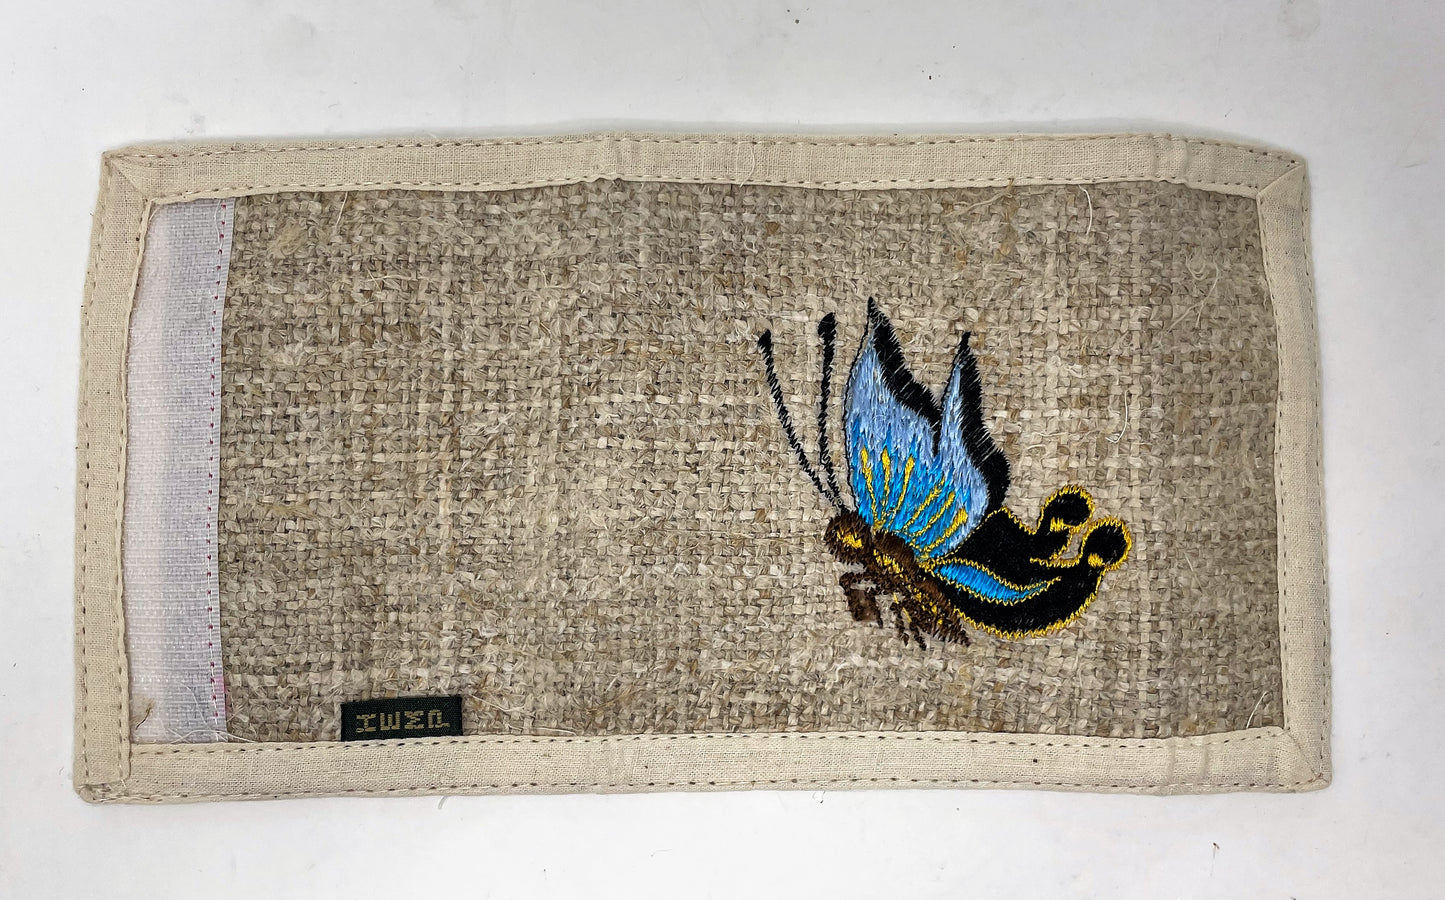 Handmade 100% Hemp Wallet with Embroidered Butterfly Design